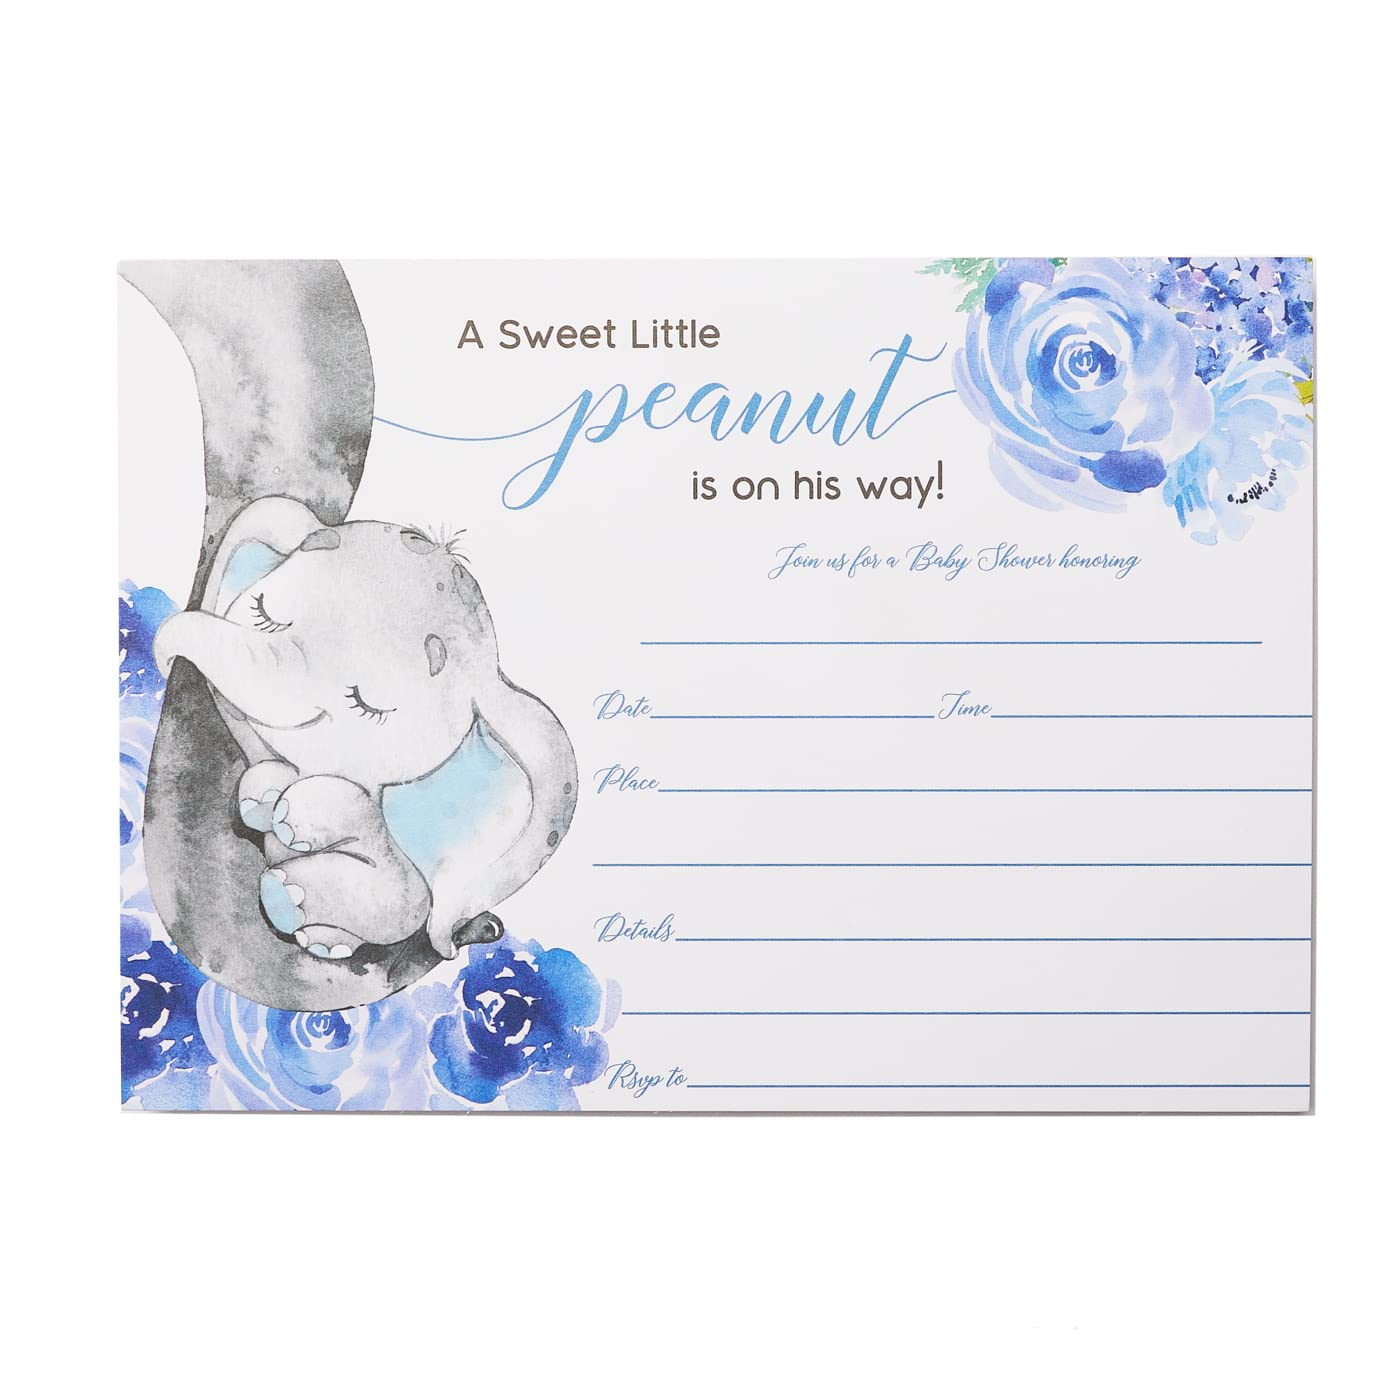 25 Elephant Jungle Baby Shower Invitations and Envelopes (Large Size 5X7 INCHES), 25 Diaper Raffle Tickets, 25 Baby Shower Book Request Cards, Floral Blue Elephant Animal Invites for Boy Baby Showers